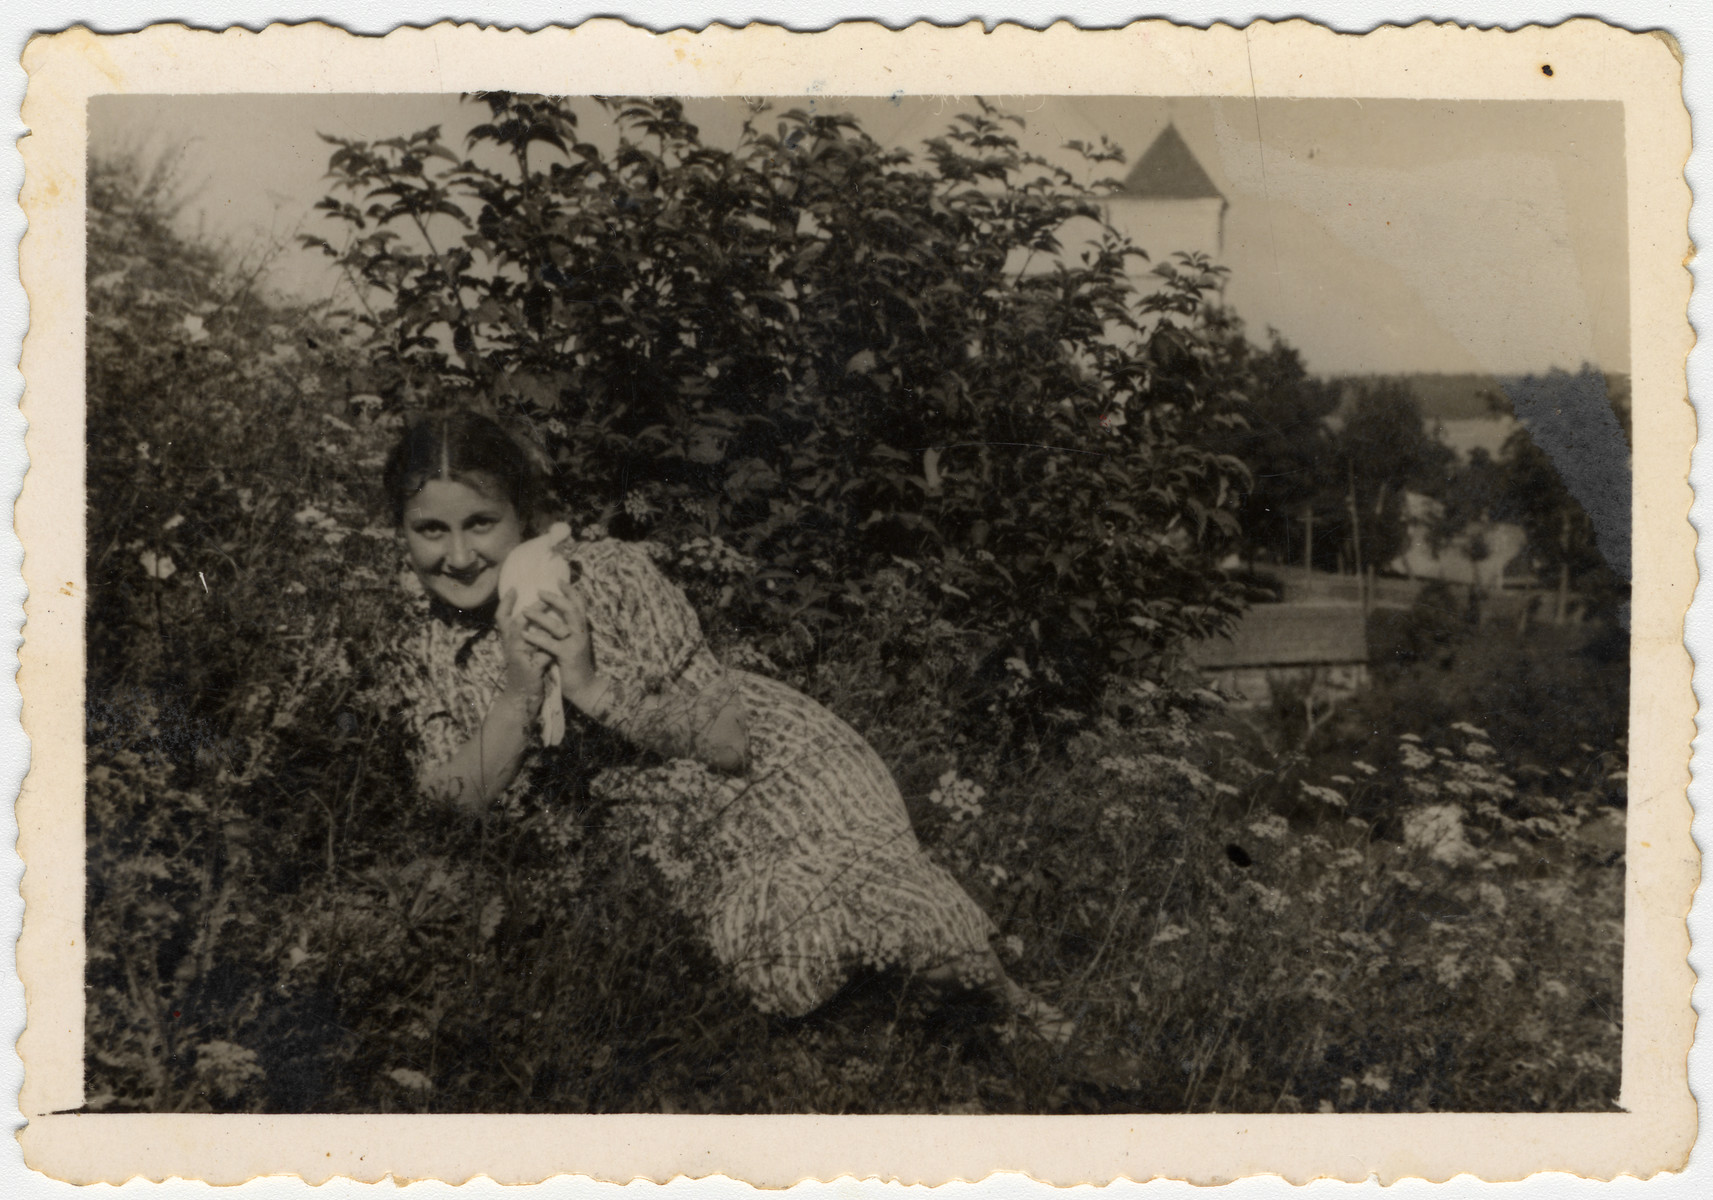 Sonia Boldo lies in a flower bed holding a kitten in prewar Nowogrodek.

Sonia escaped from the Nowogrodek ghetto in 1942 and came to the forest.  There she met and married Zus Bielski.